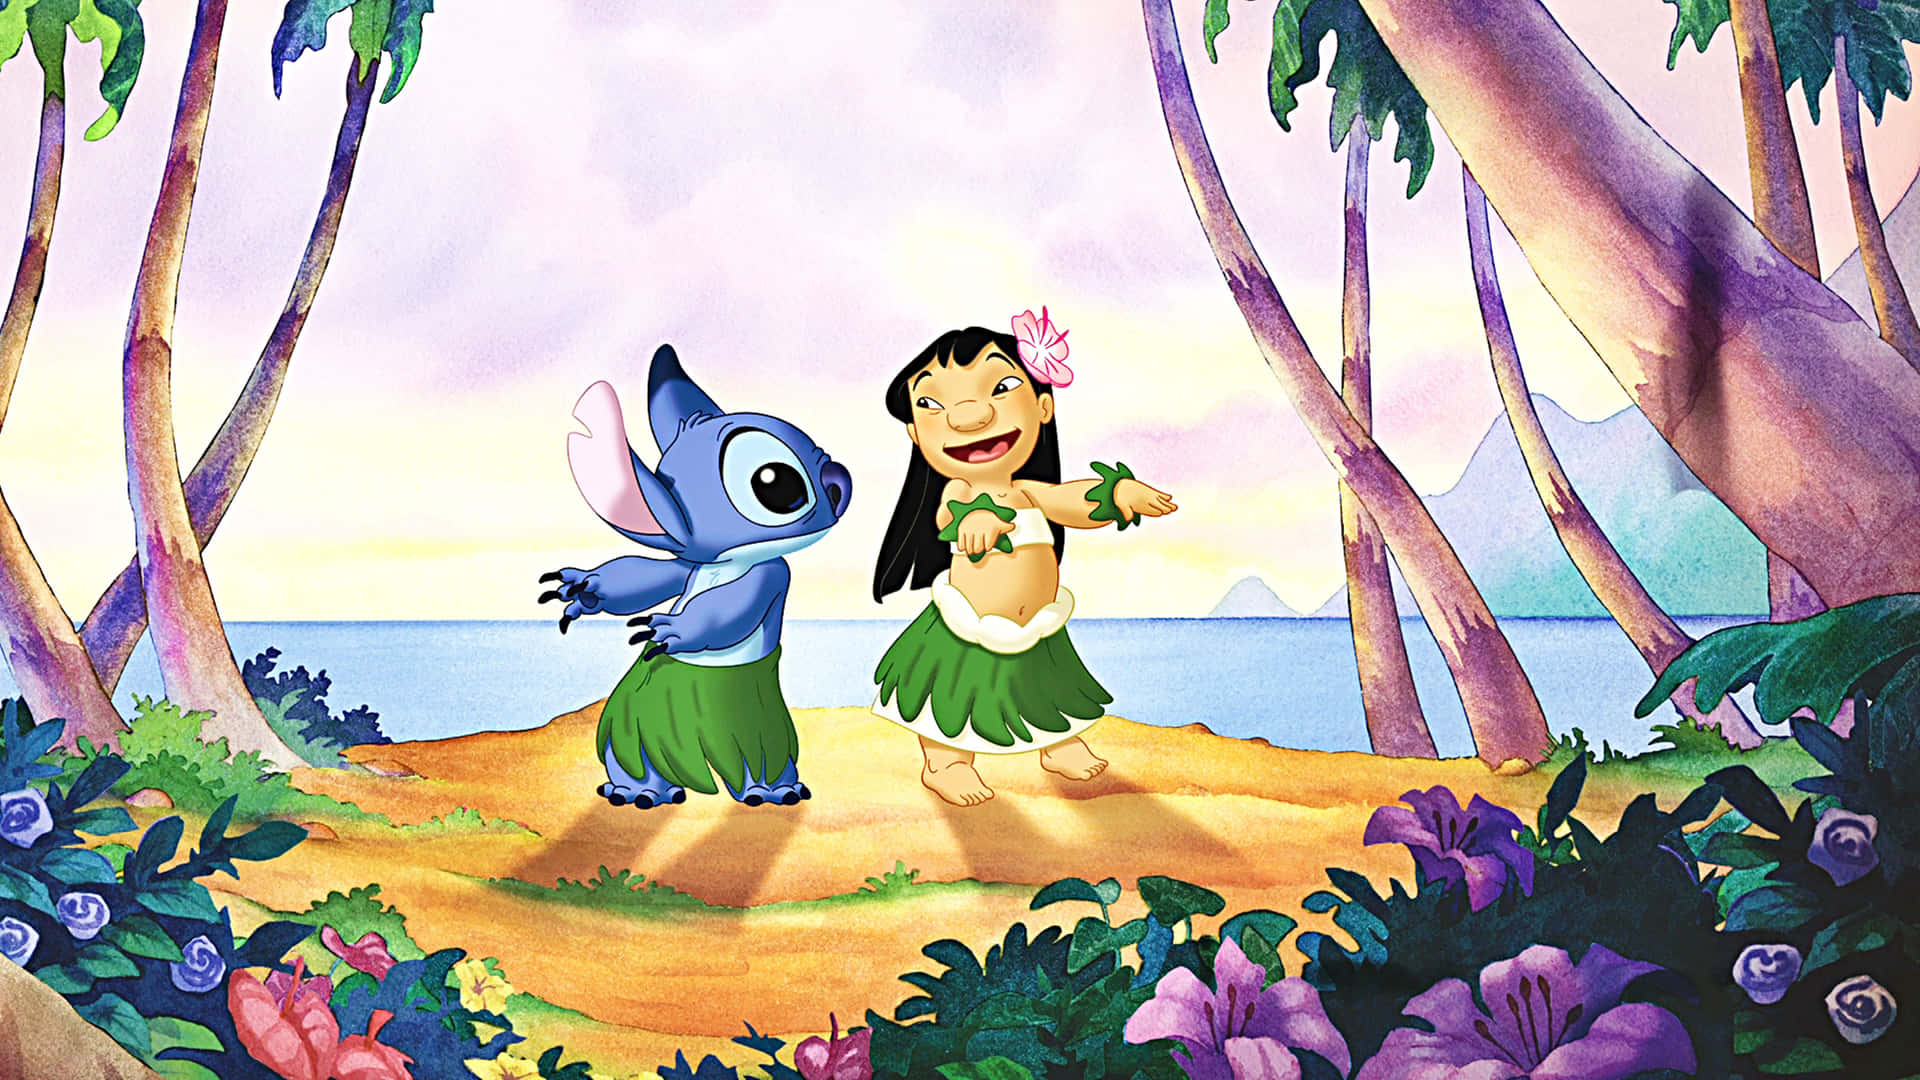 Lilo and Stitch share a heartfelt moment together. Wallpaper